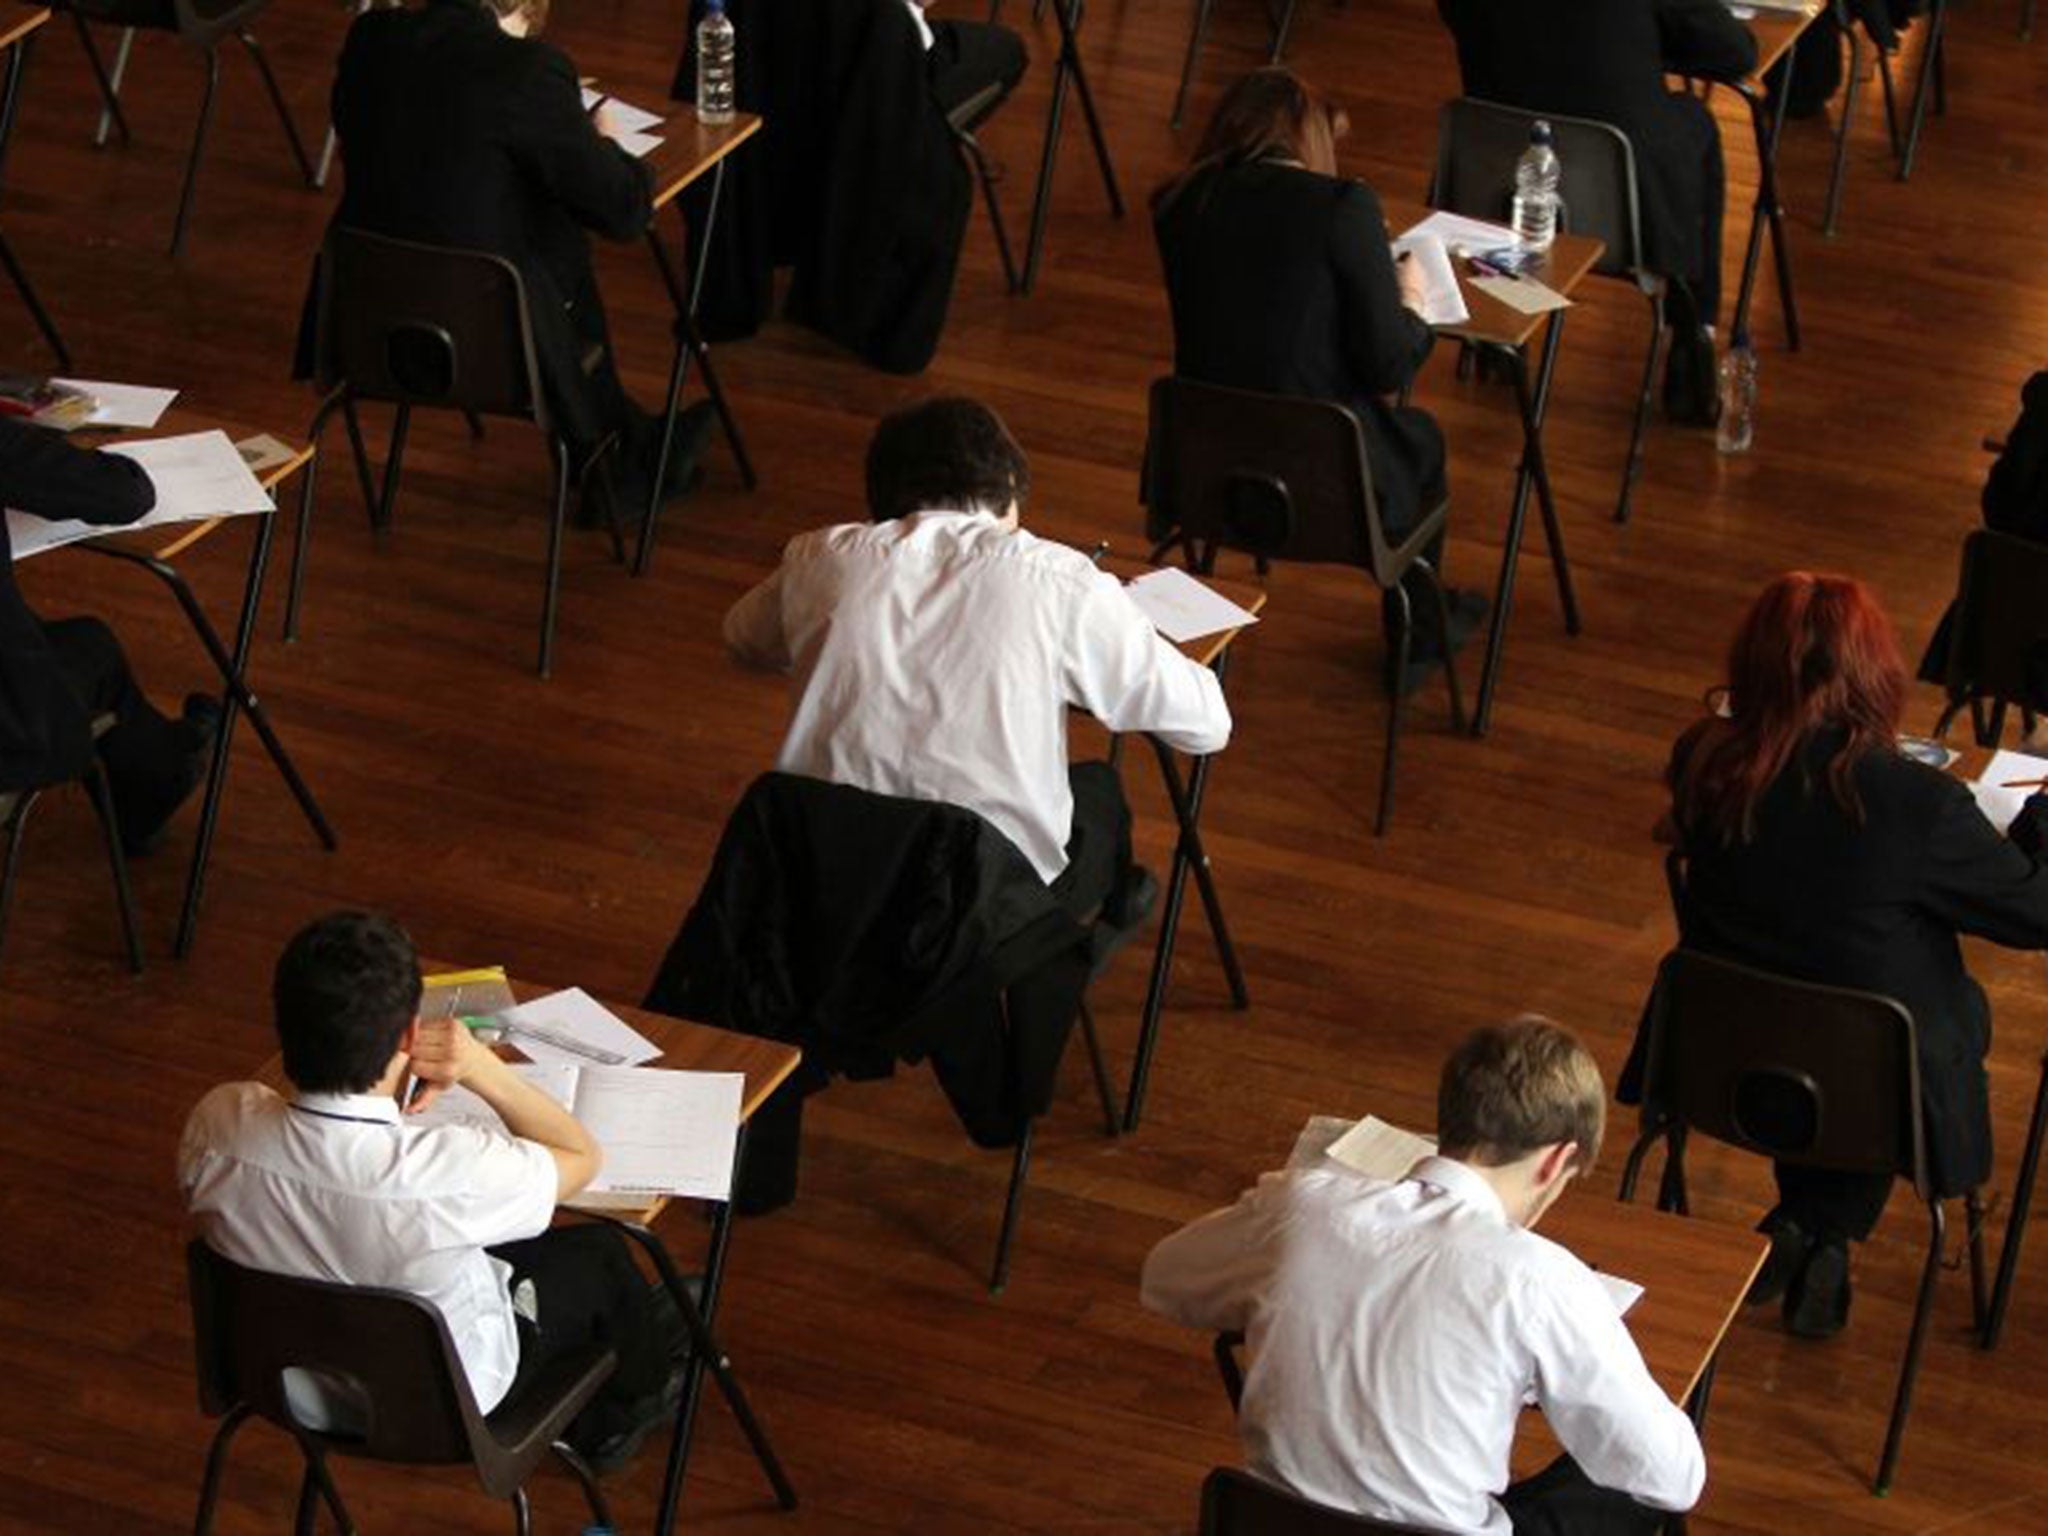 Schools have been warned that they could see differences in their GCSE and A-level results this year following major reforms to the exams